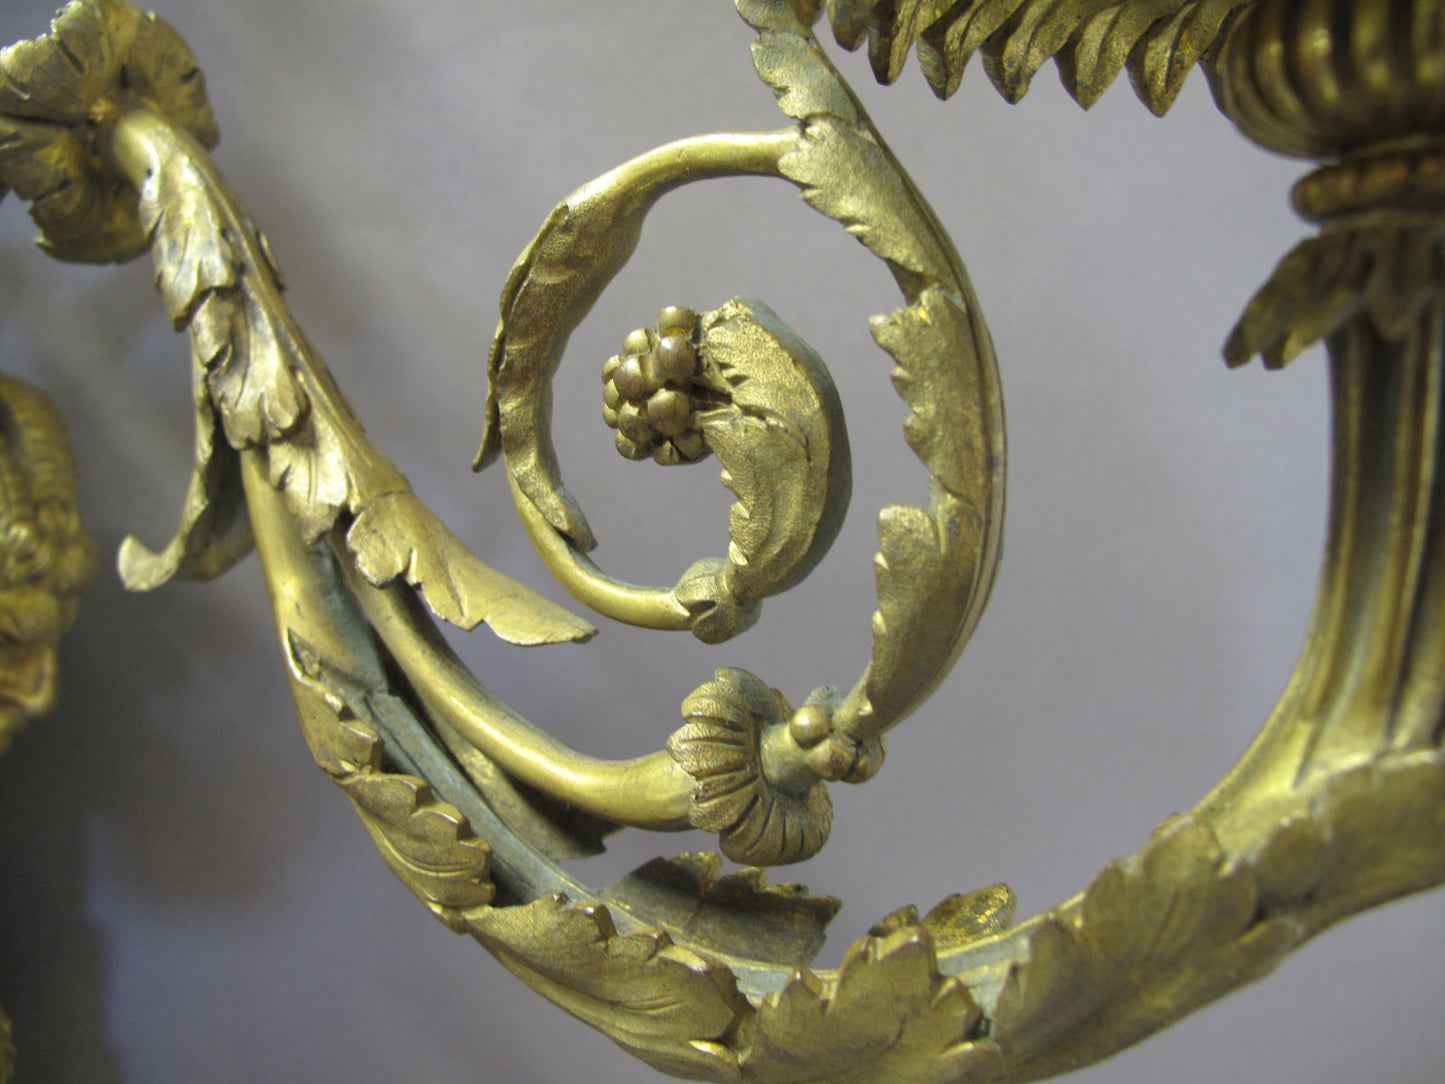 view of intricate brass casting on arm